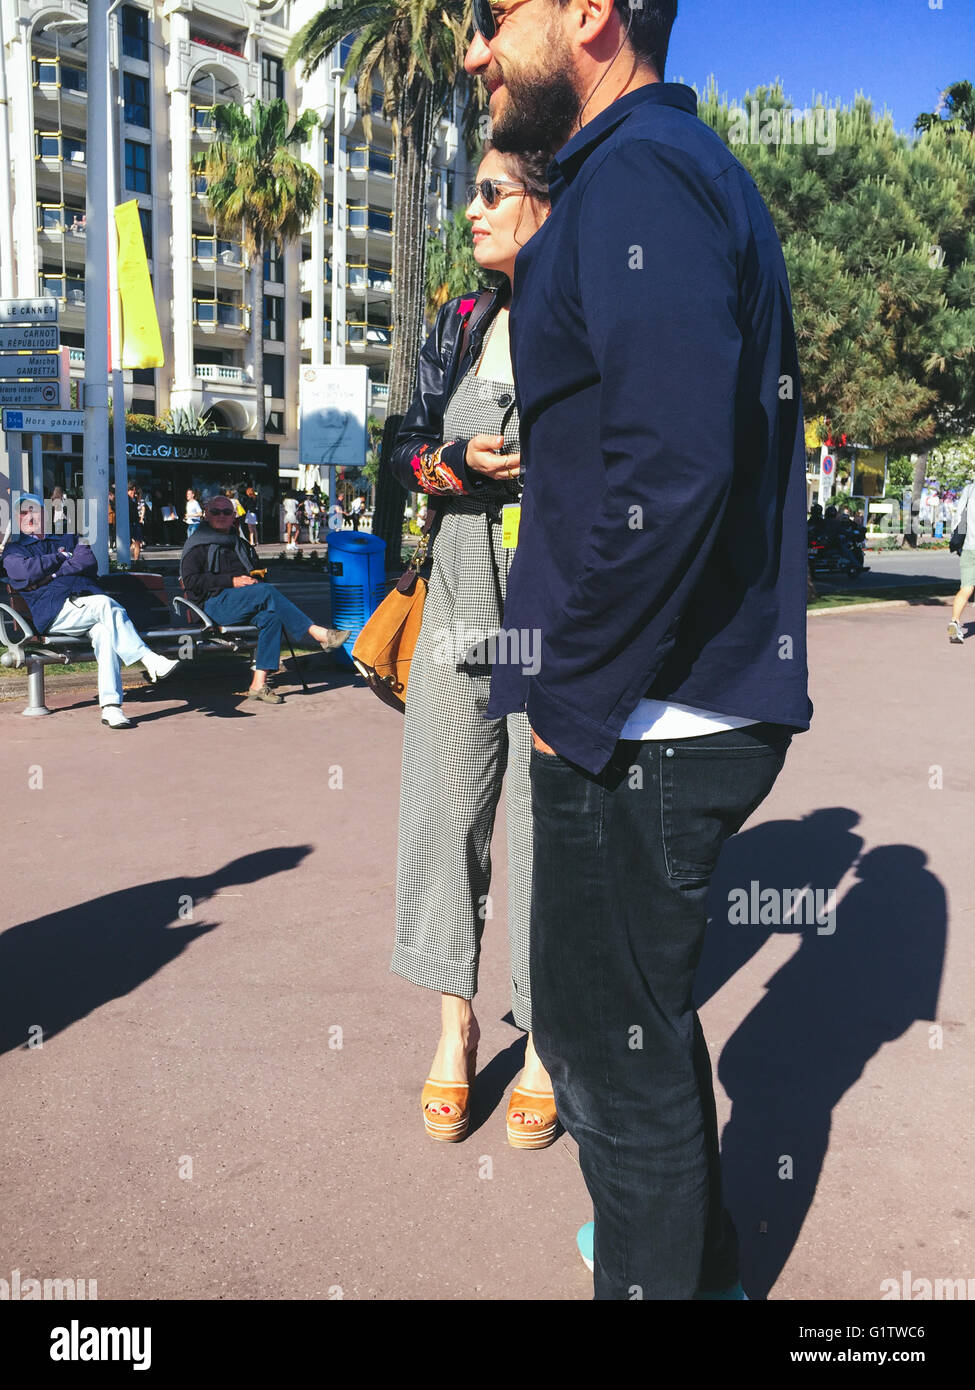 Cannes, France. 19th May, 2016. French actress Laetitia Casta spotted in the croiisette of Cannes, without any security around she was comfortable enough to mix in the crowd of Cannes Film Festival on the 19th May 2016. The photo has been taken with a mobile phone. Credit:  JBphotoeditorial/Alamy Live News Stock Photo